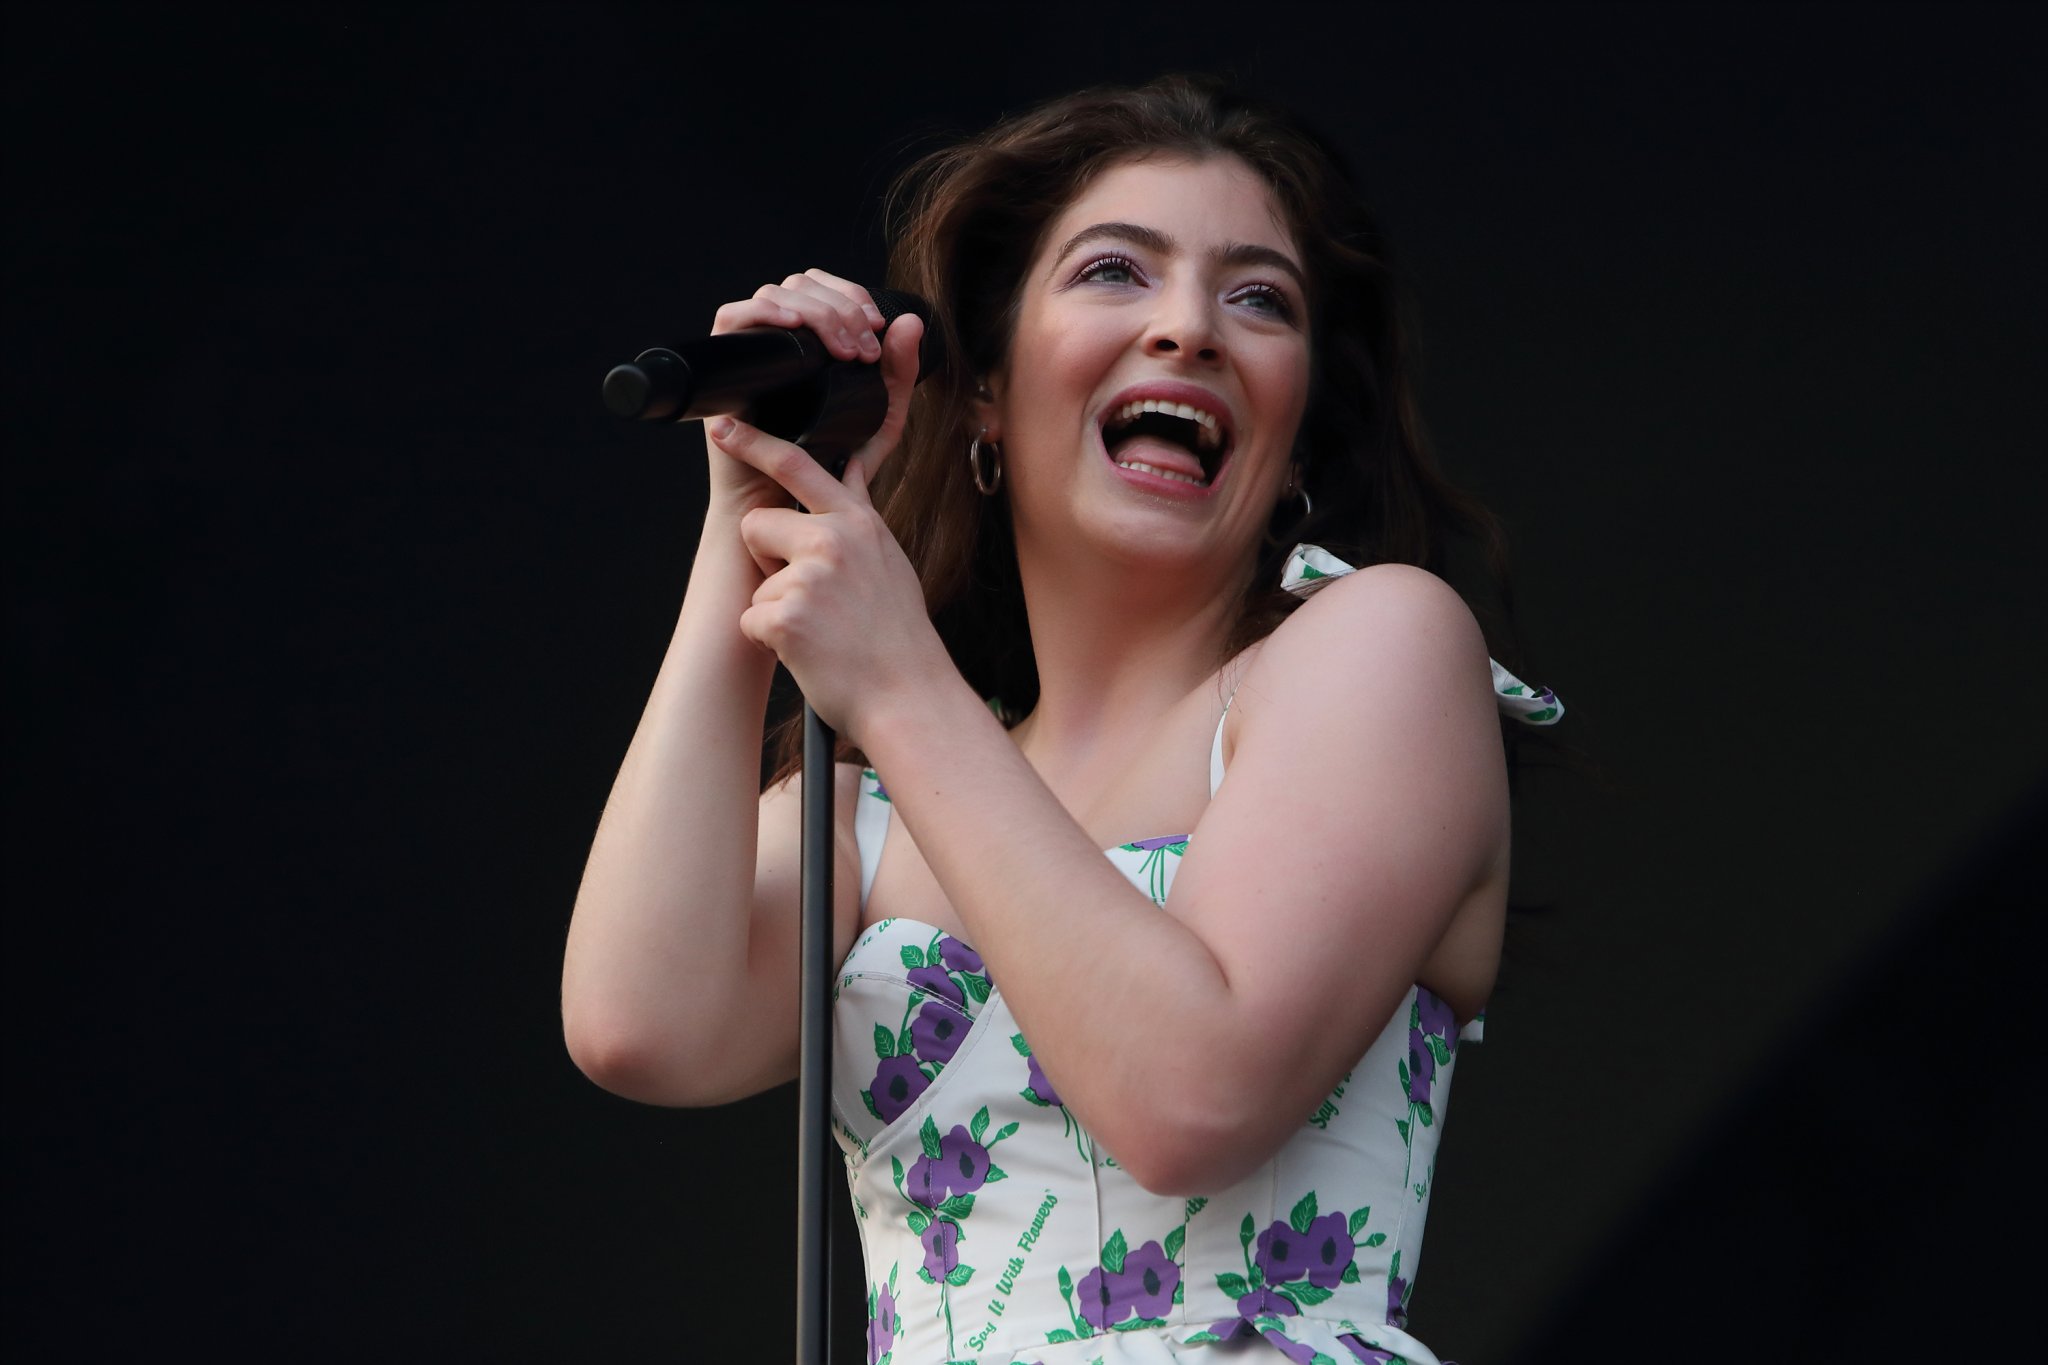 Watch Lorde Cover Frank Ocean's "Lost" at Primavera Sound